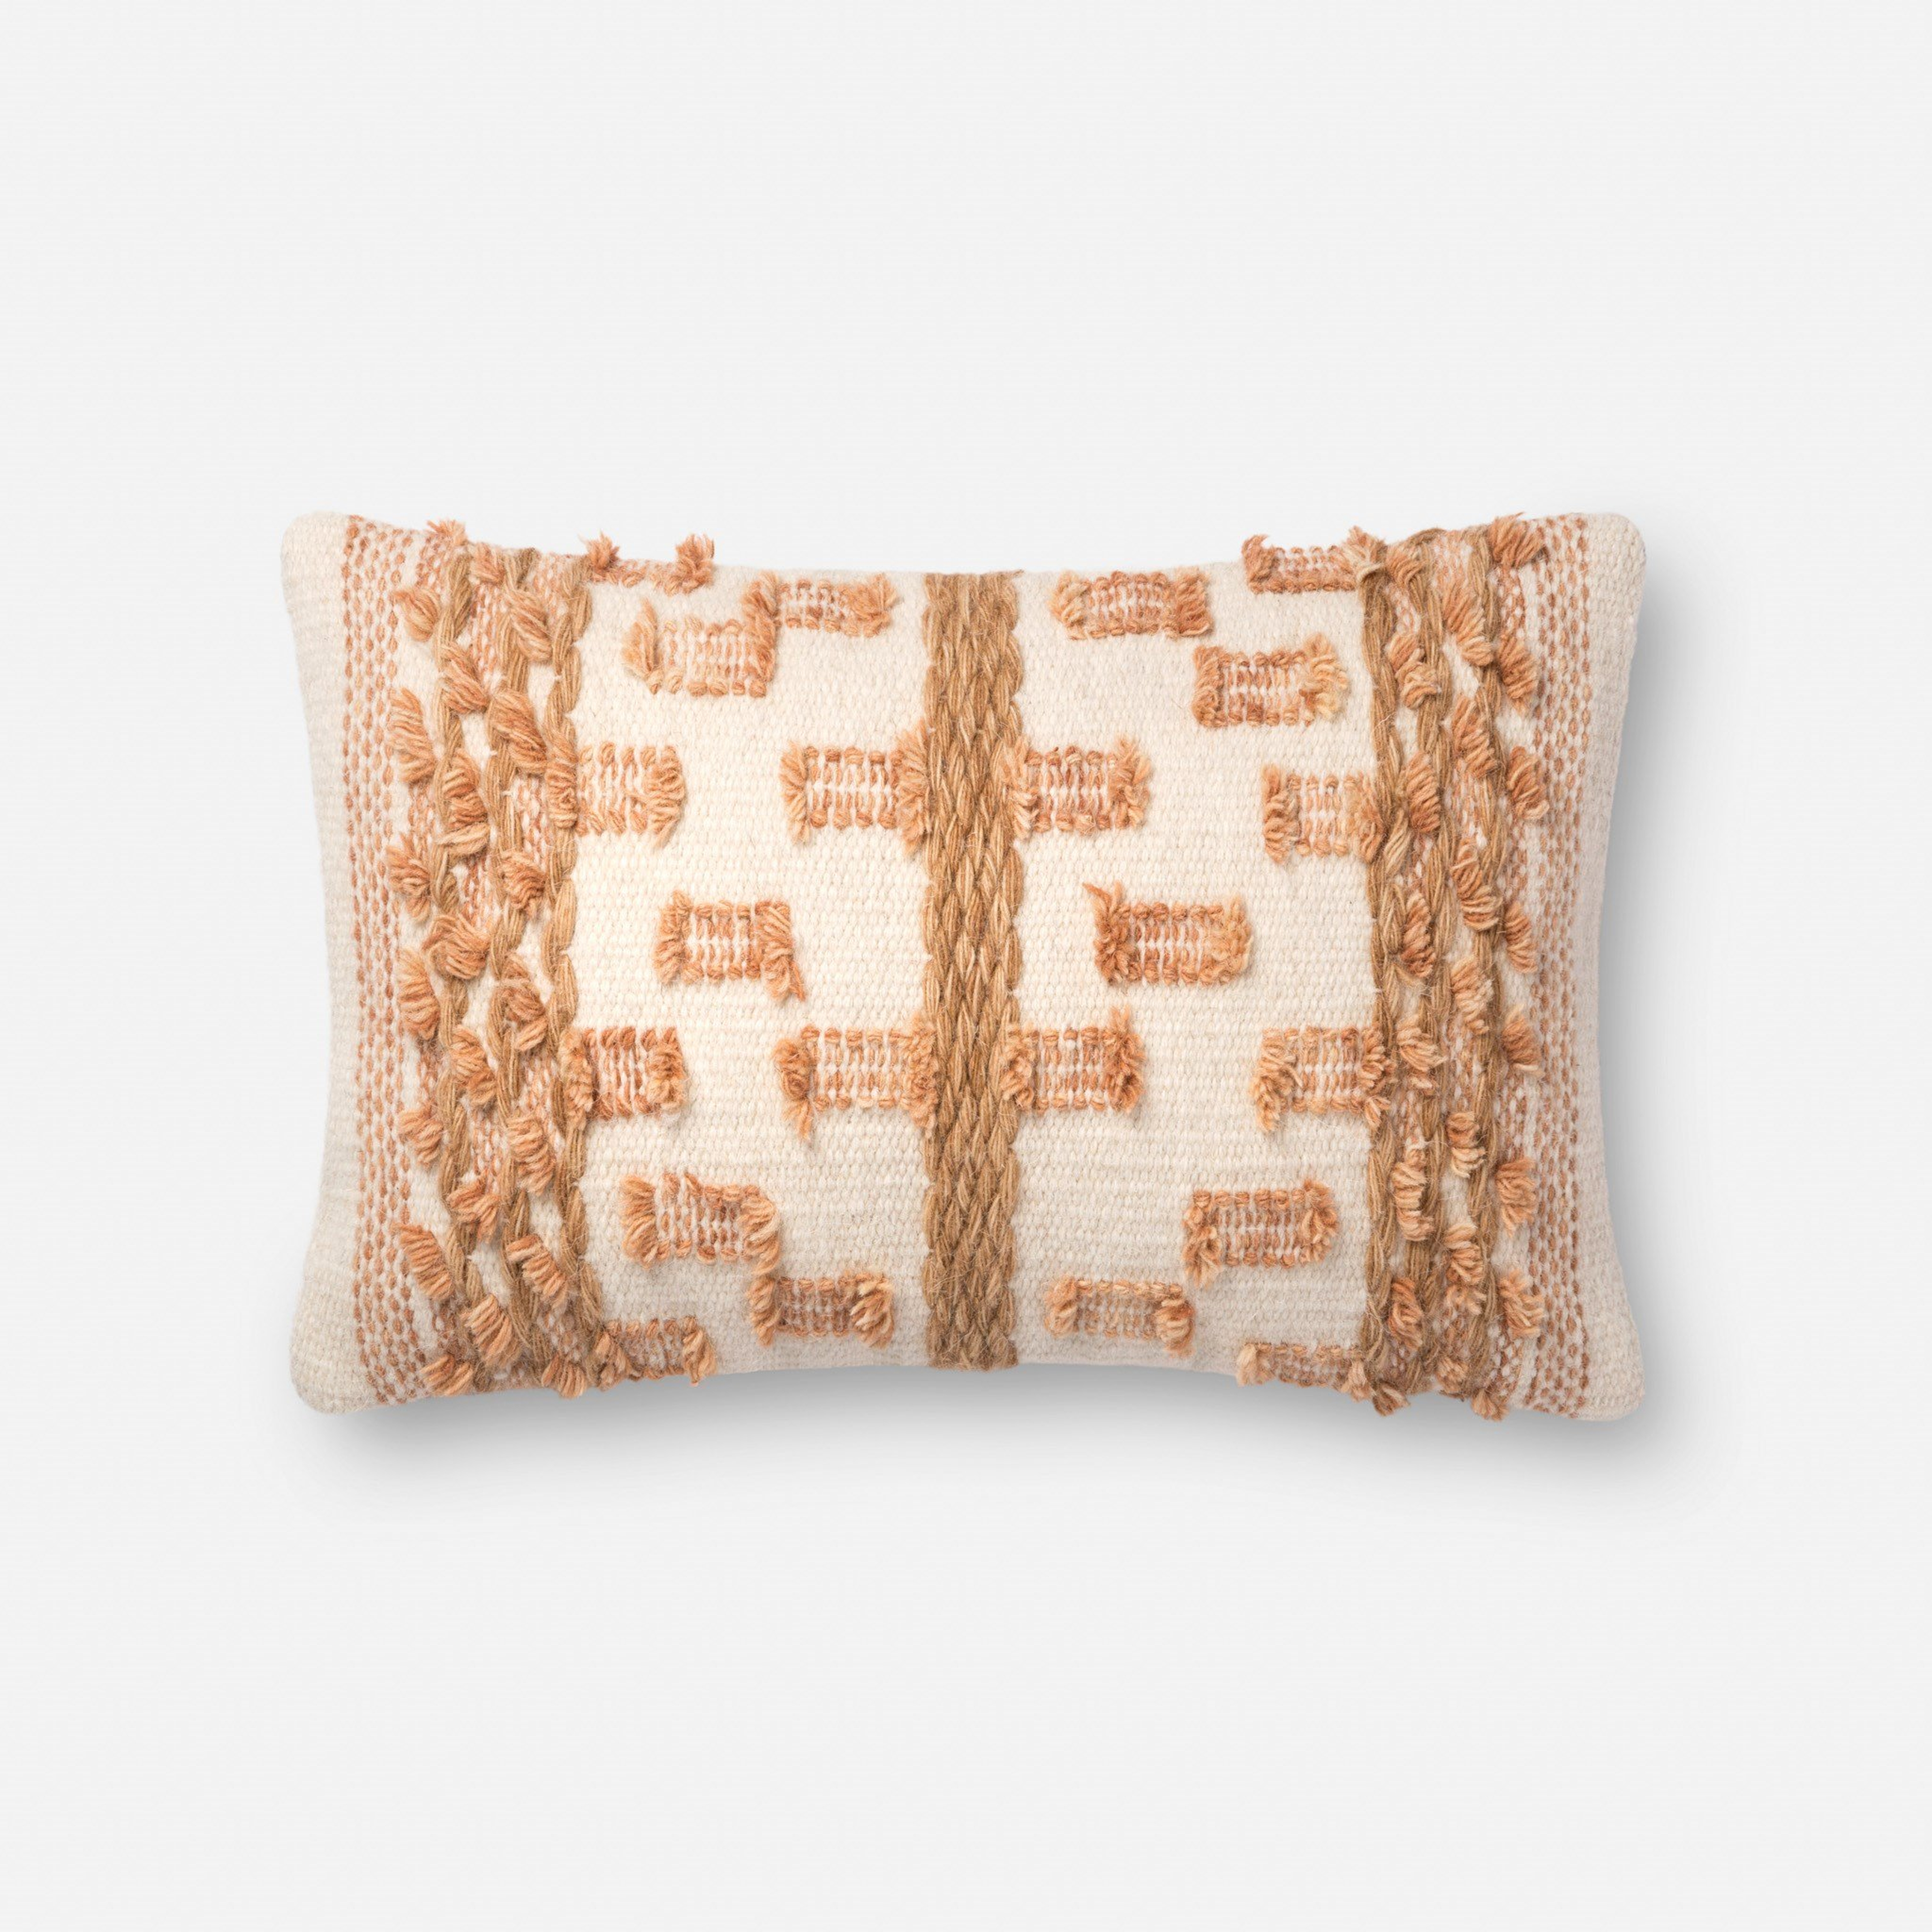 PILLOWS - BEIGE / RUST - Magnolia Home by Joana Gaines Crafted by Loloi Rugs